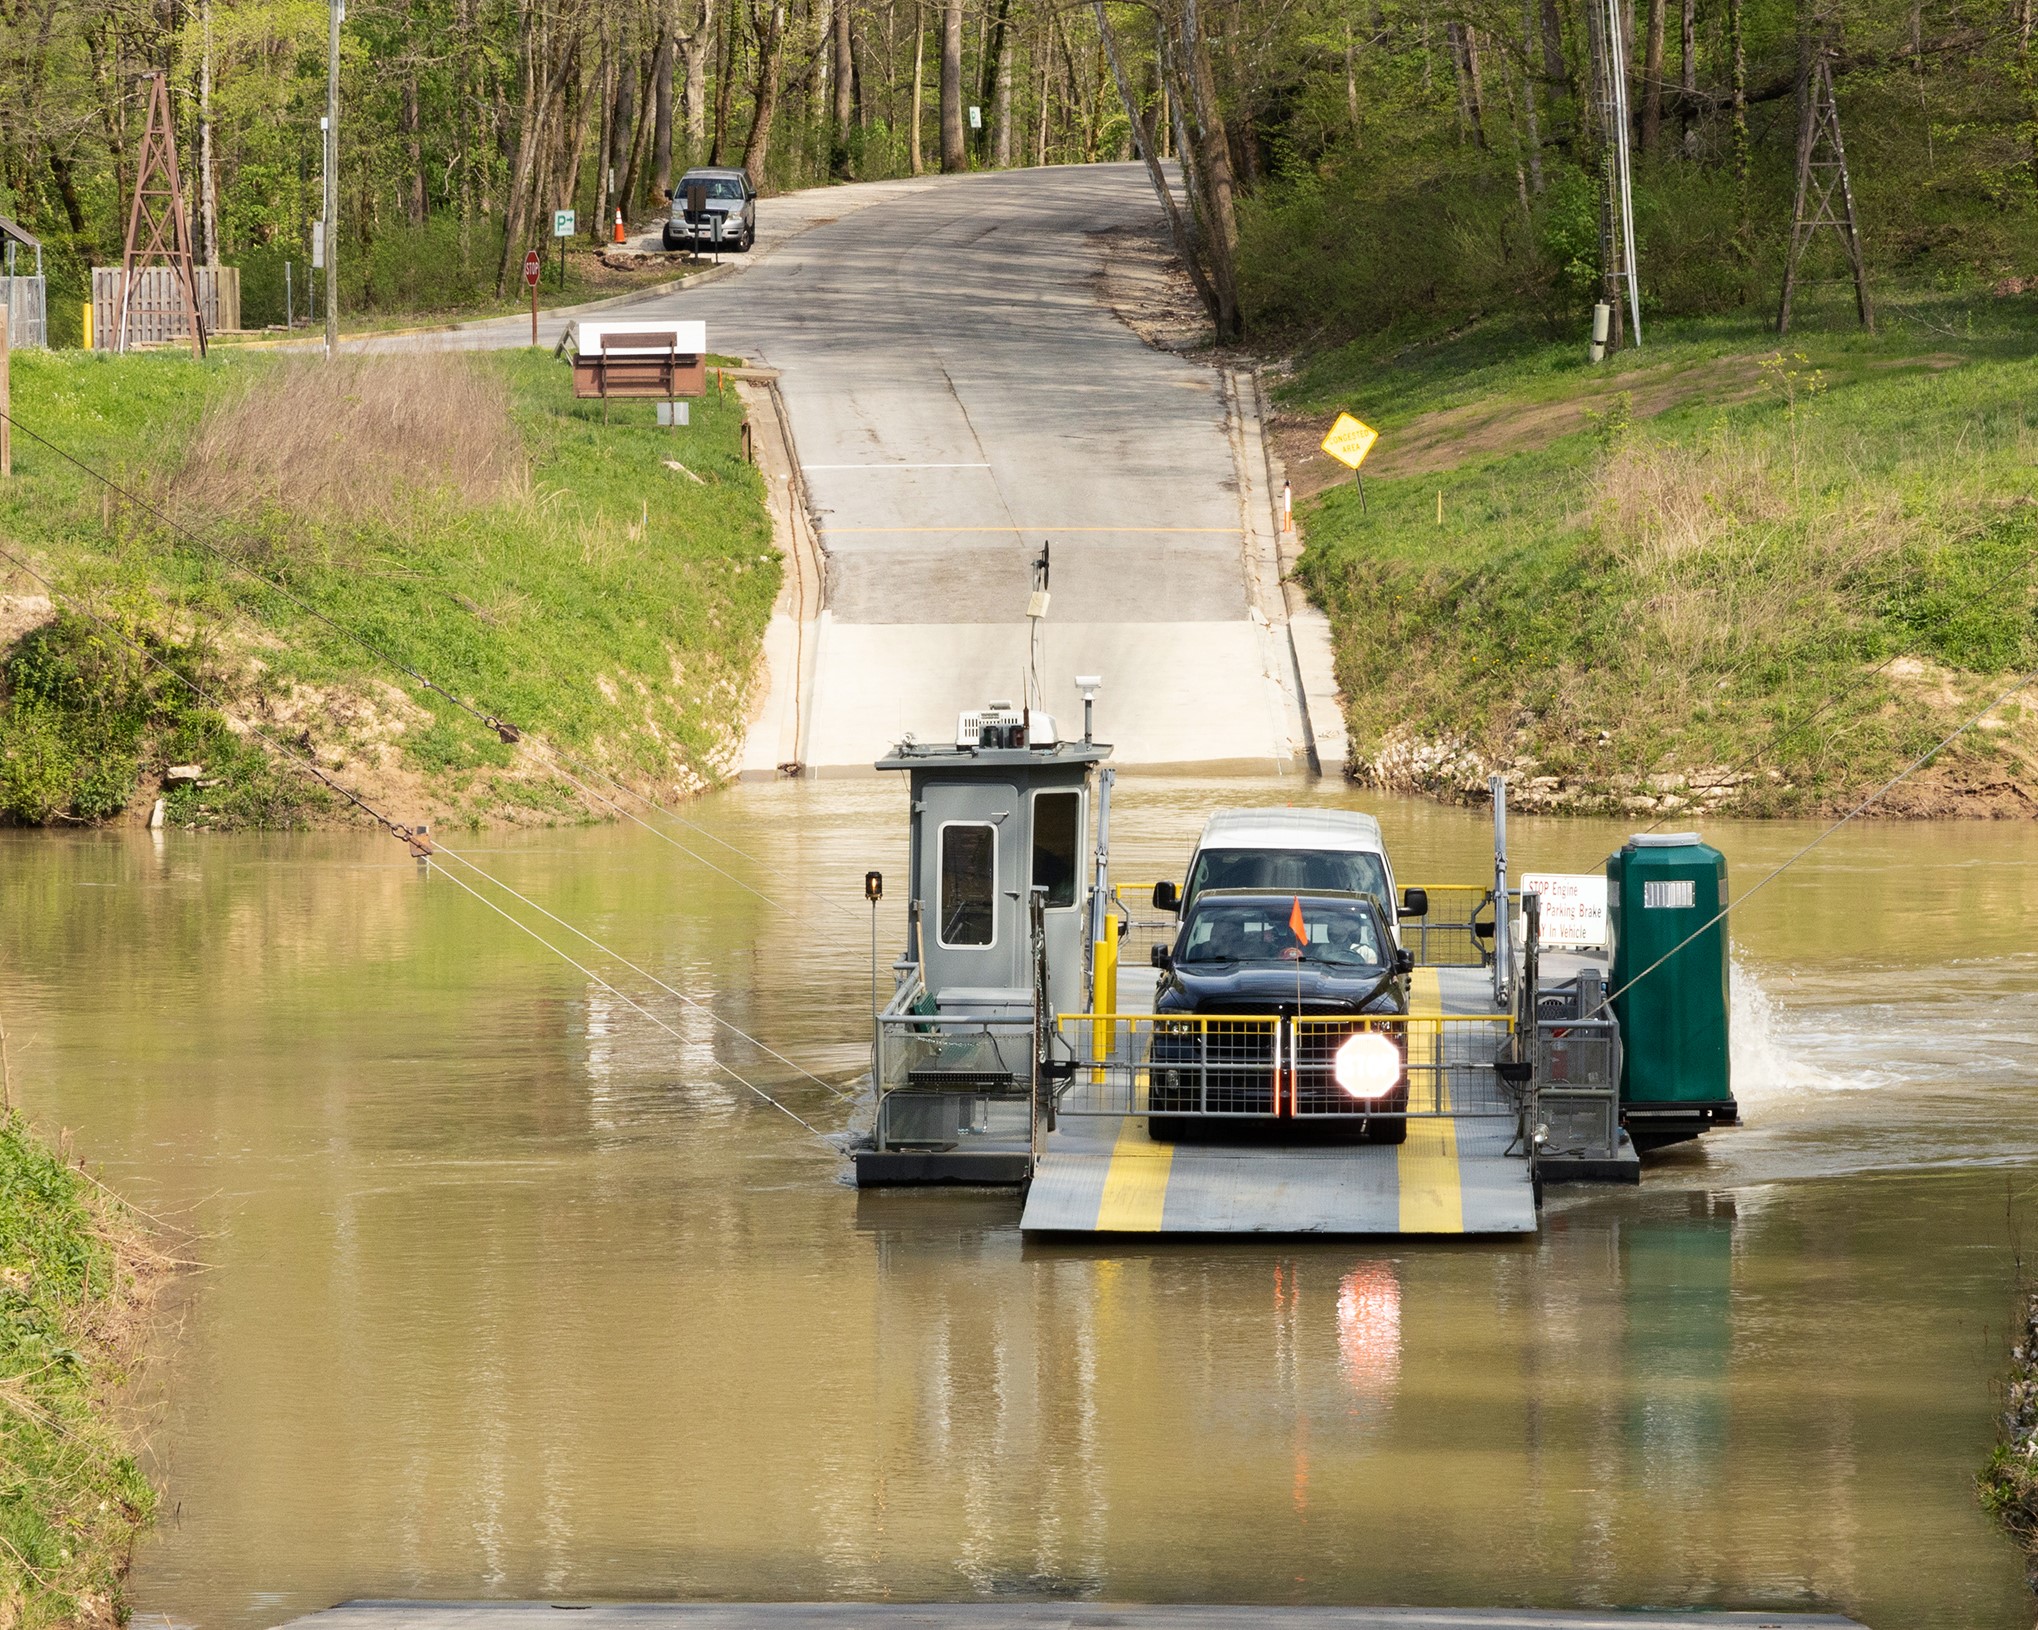 Two vehicles sit parked behind the closed gate of a small gray vehicle ferry as it moves across a muddy brown body of water.